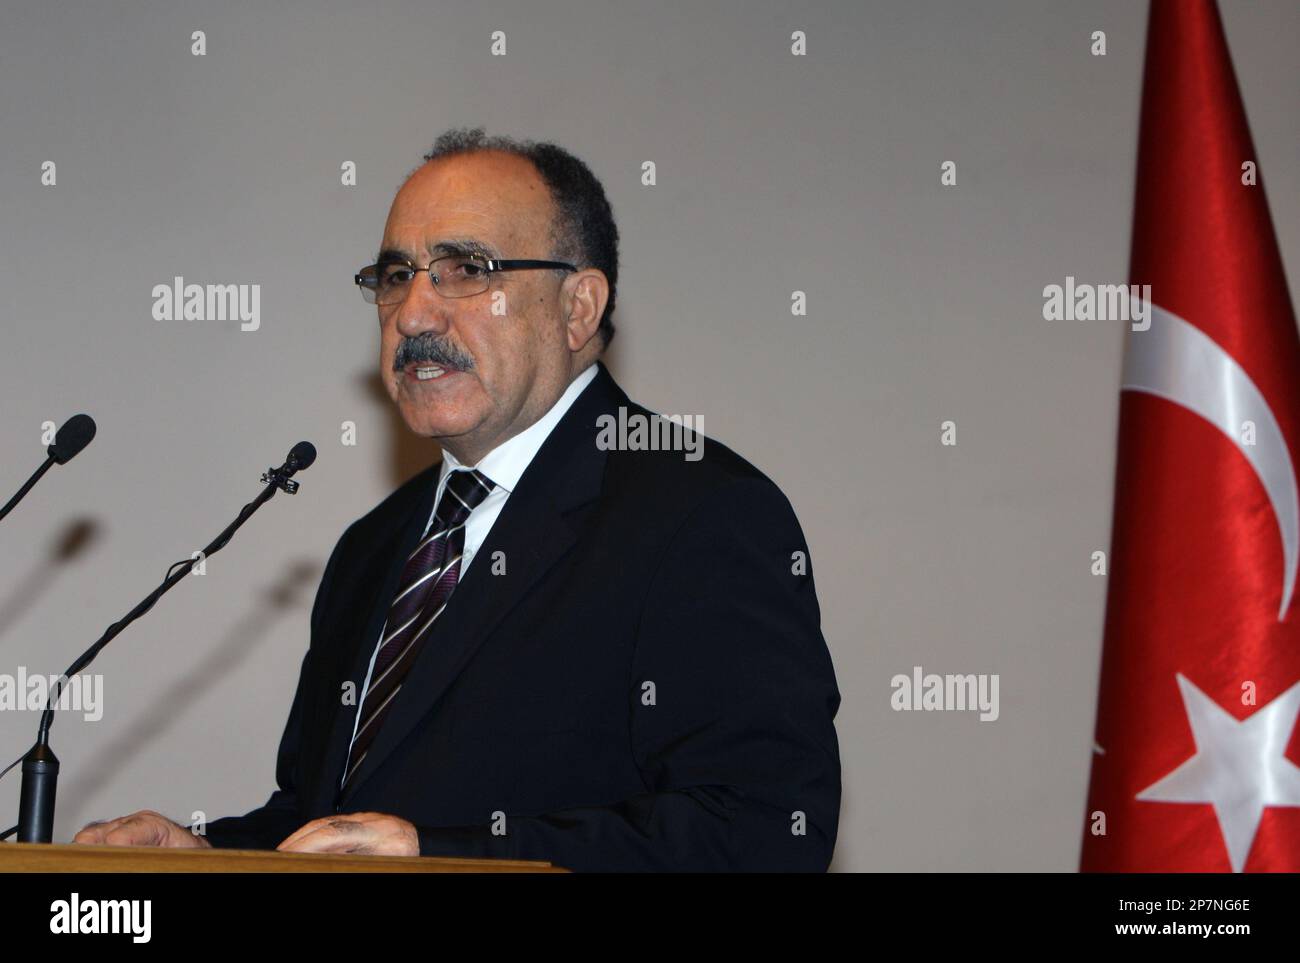 Turkish Interior Minister Besir Atalay speaks to the media about his government's 'Kurdish initiative' in Ankara, Turkey, Monday, Dec. 7, 2009 as attackers raked a military vehicle with automatic weapons on Monday, killing at least seven Turkish soldiers in an ambush in foggy weather in the town of Resadiye, Tokat in central Turkey, authorities said. Authorities could not identify the attackers but Kurdish and leftist militants are active in the area. (AP Photo/Burhan Ozbilici) Stock Photo